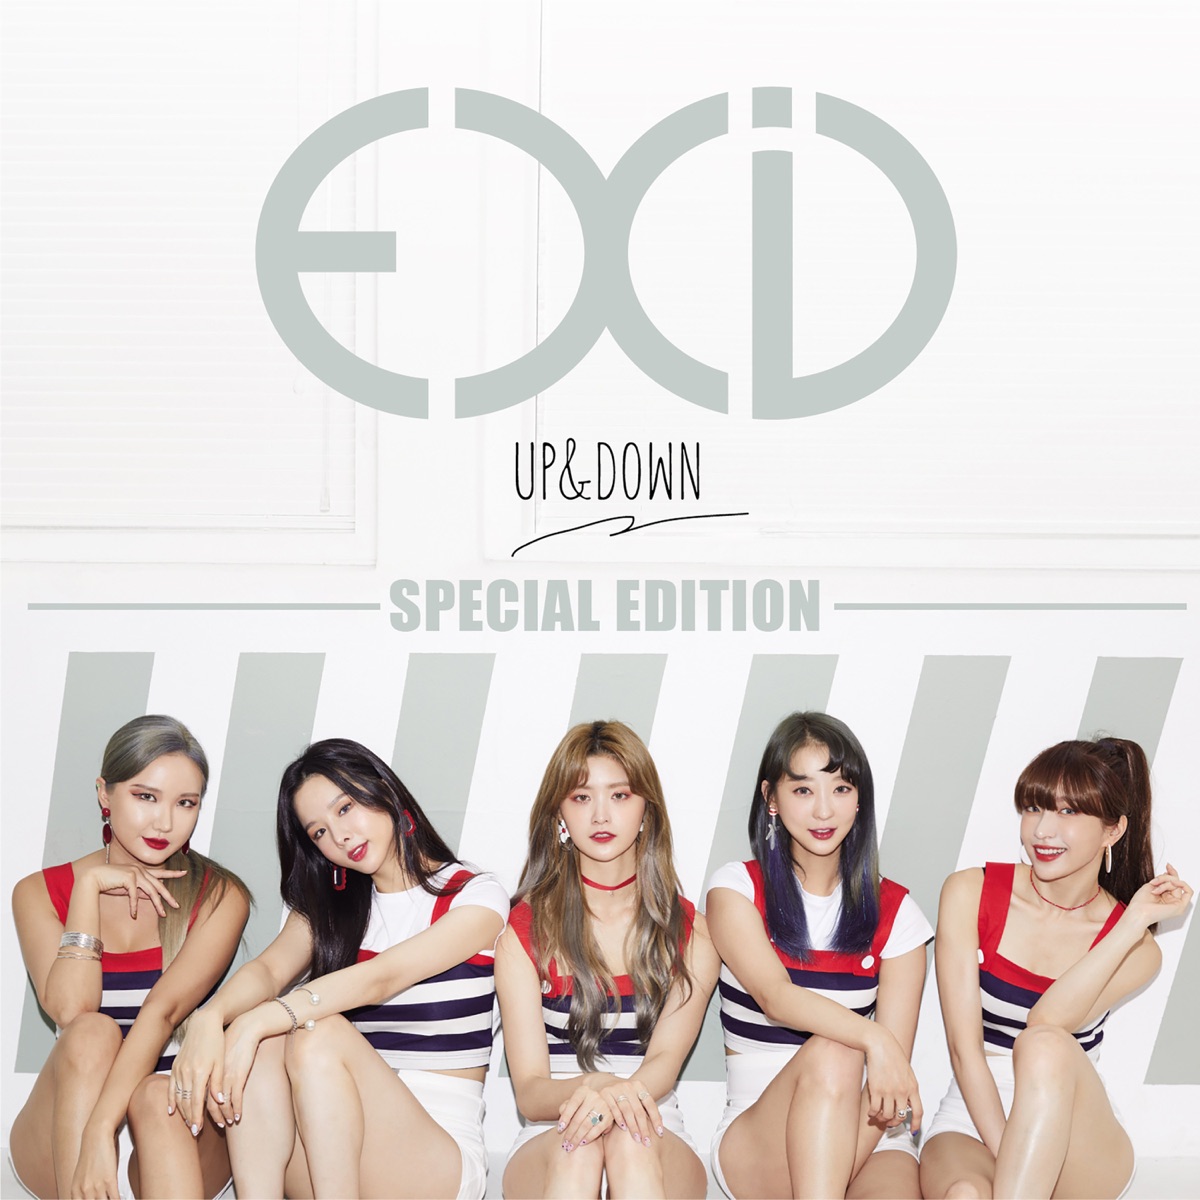 Up & Down - Single - Album by EXID - Apple Music